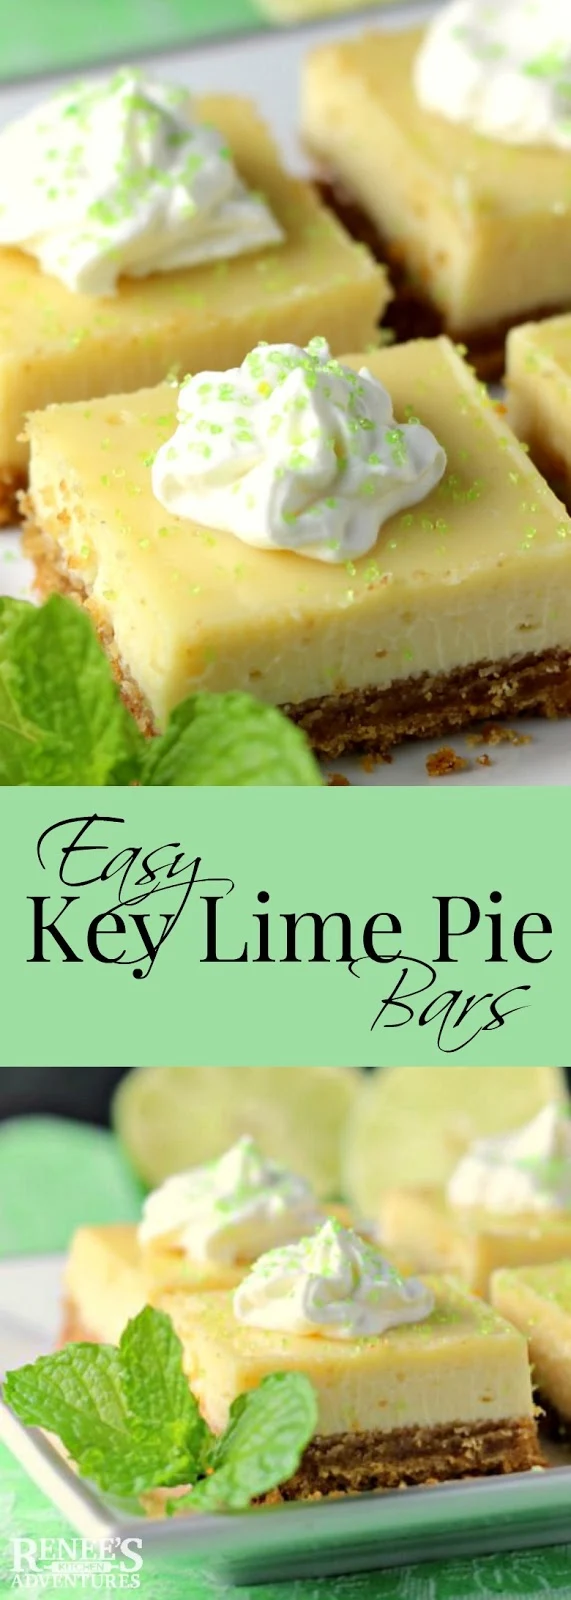 Easy Key Lime Pie Bars | Renee's Kitchen Adventures - easy dessert recipe for key lime pie bars made with key lime juice, condensed milk and eggs. #dessert #lime